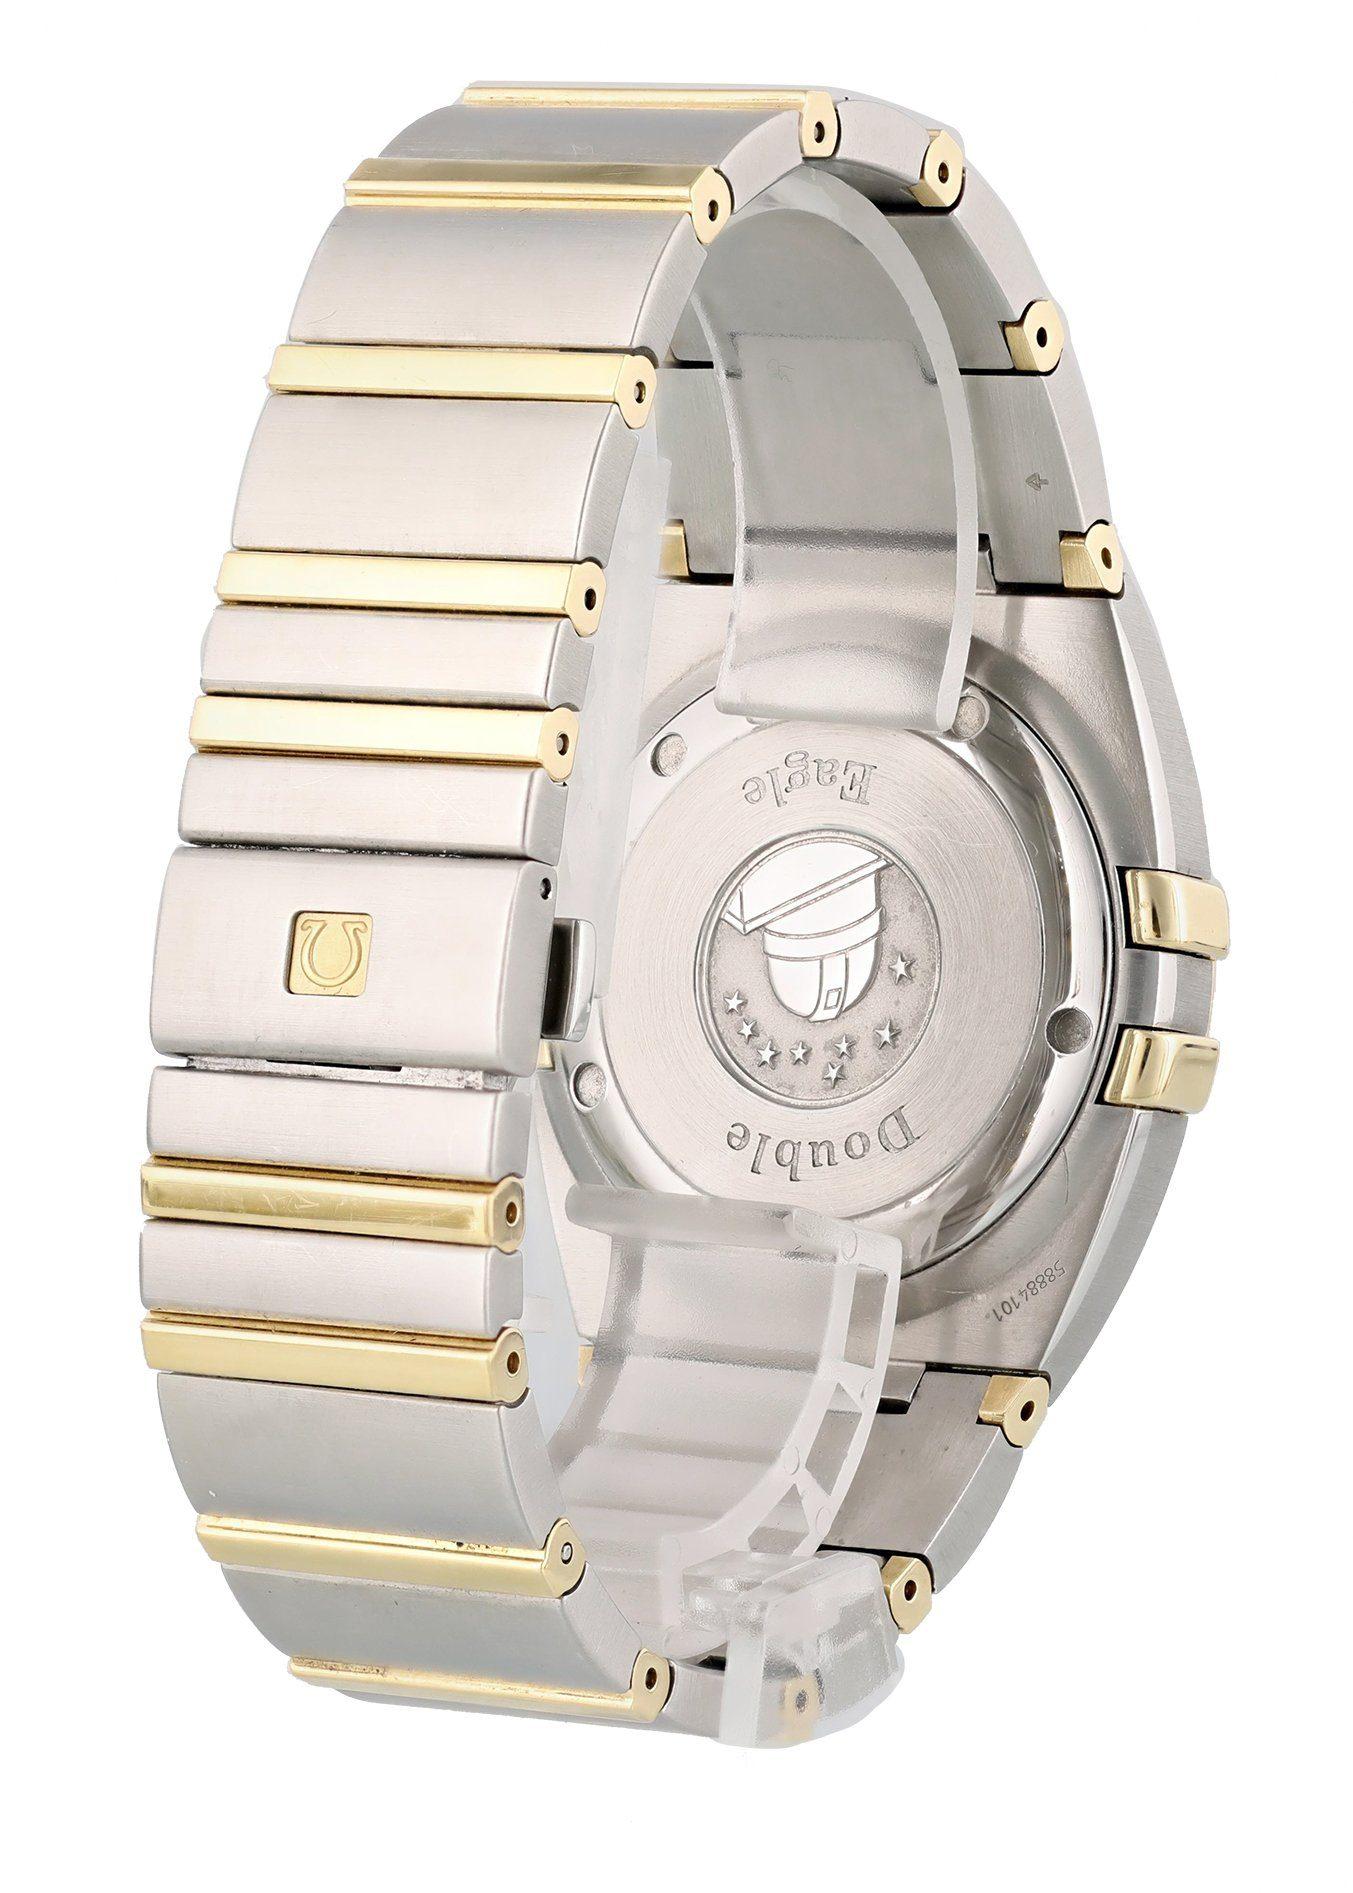 Omega Constellation Double Eagle 1213.30.00 Men's Watch In Excellent Condition For Sale In New York, NY